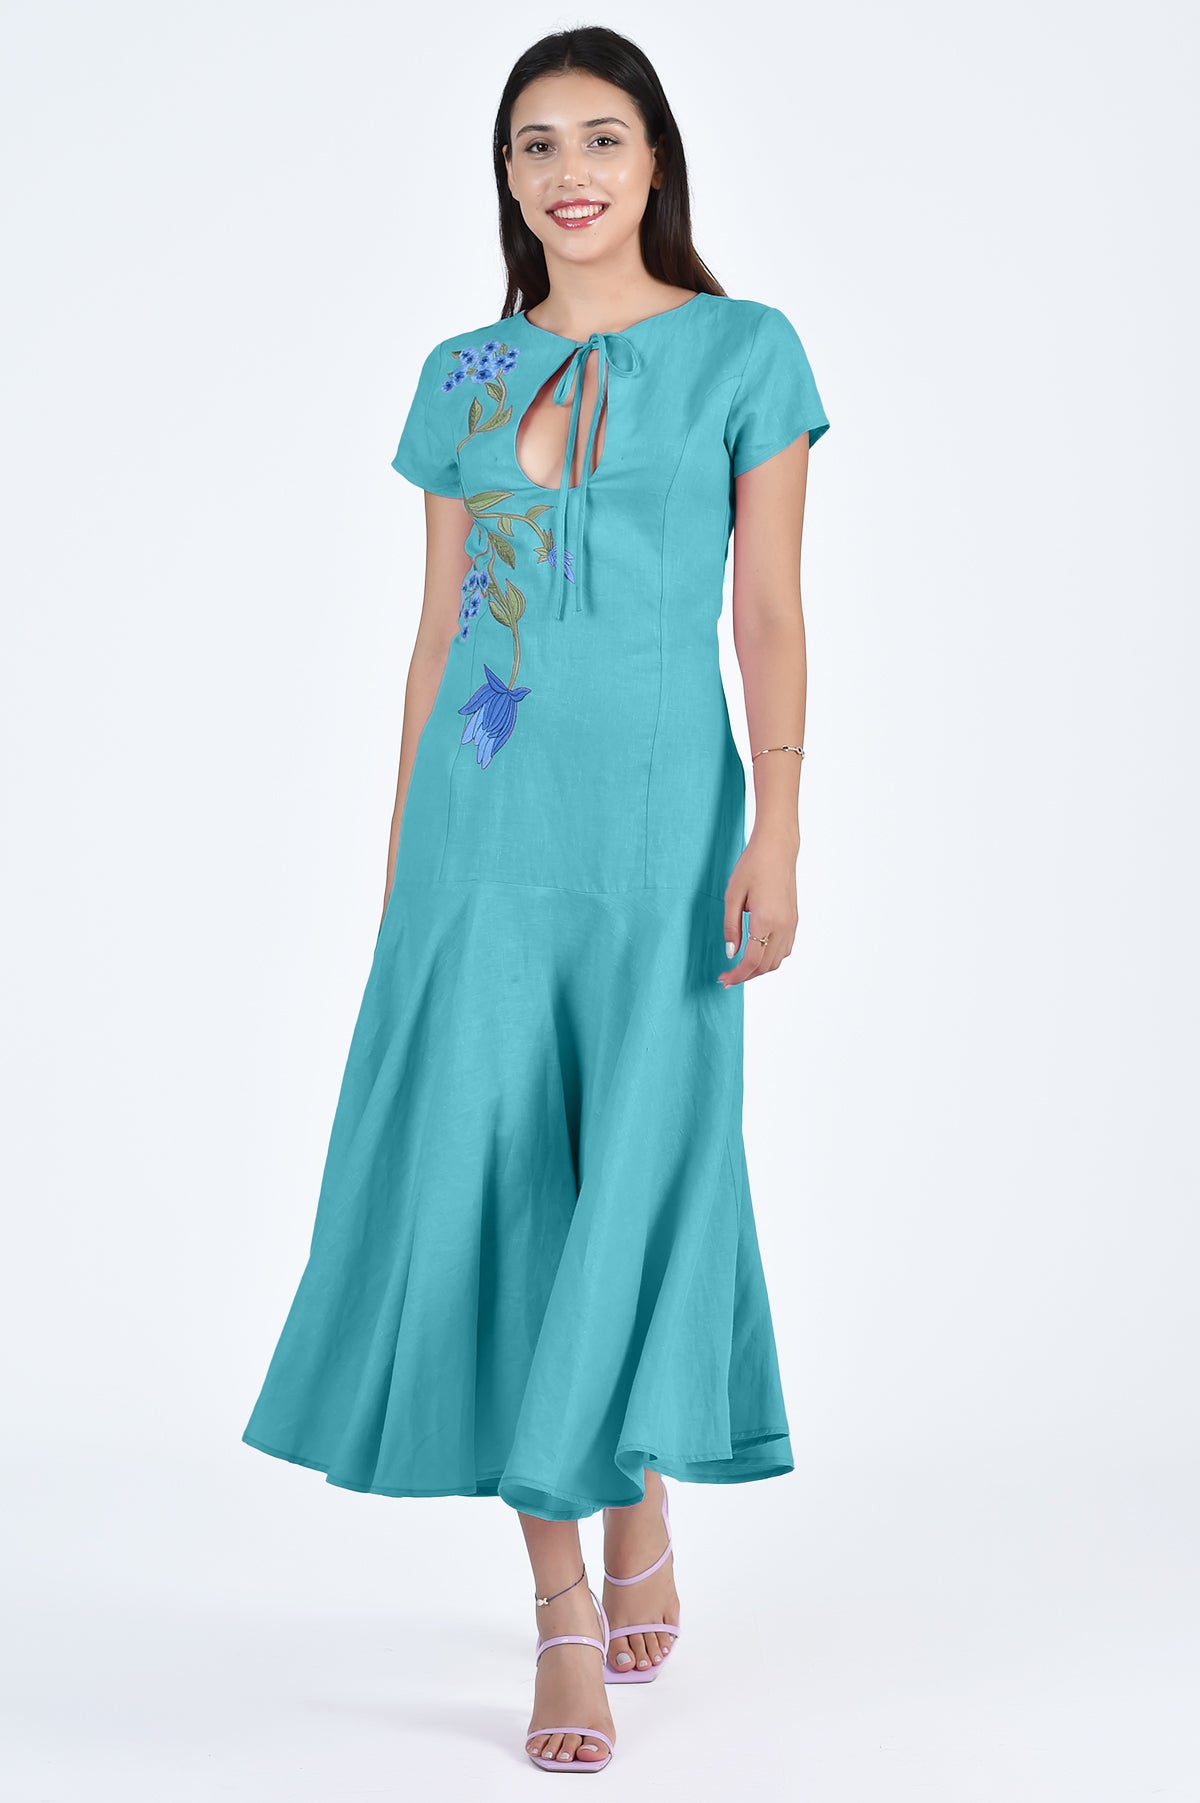 Barbara Dress by Fanm Mon in Teal with Floral Embroidery Details